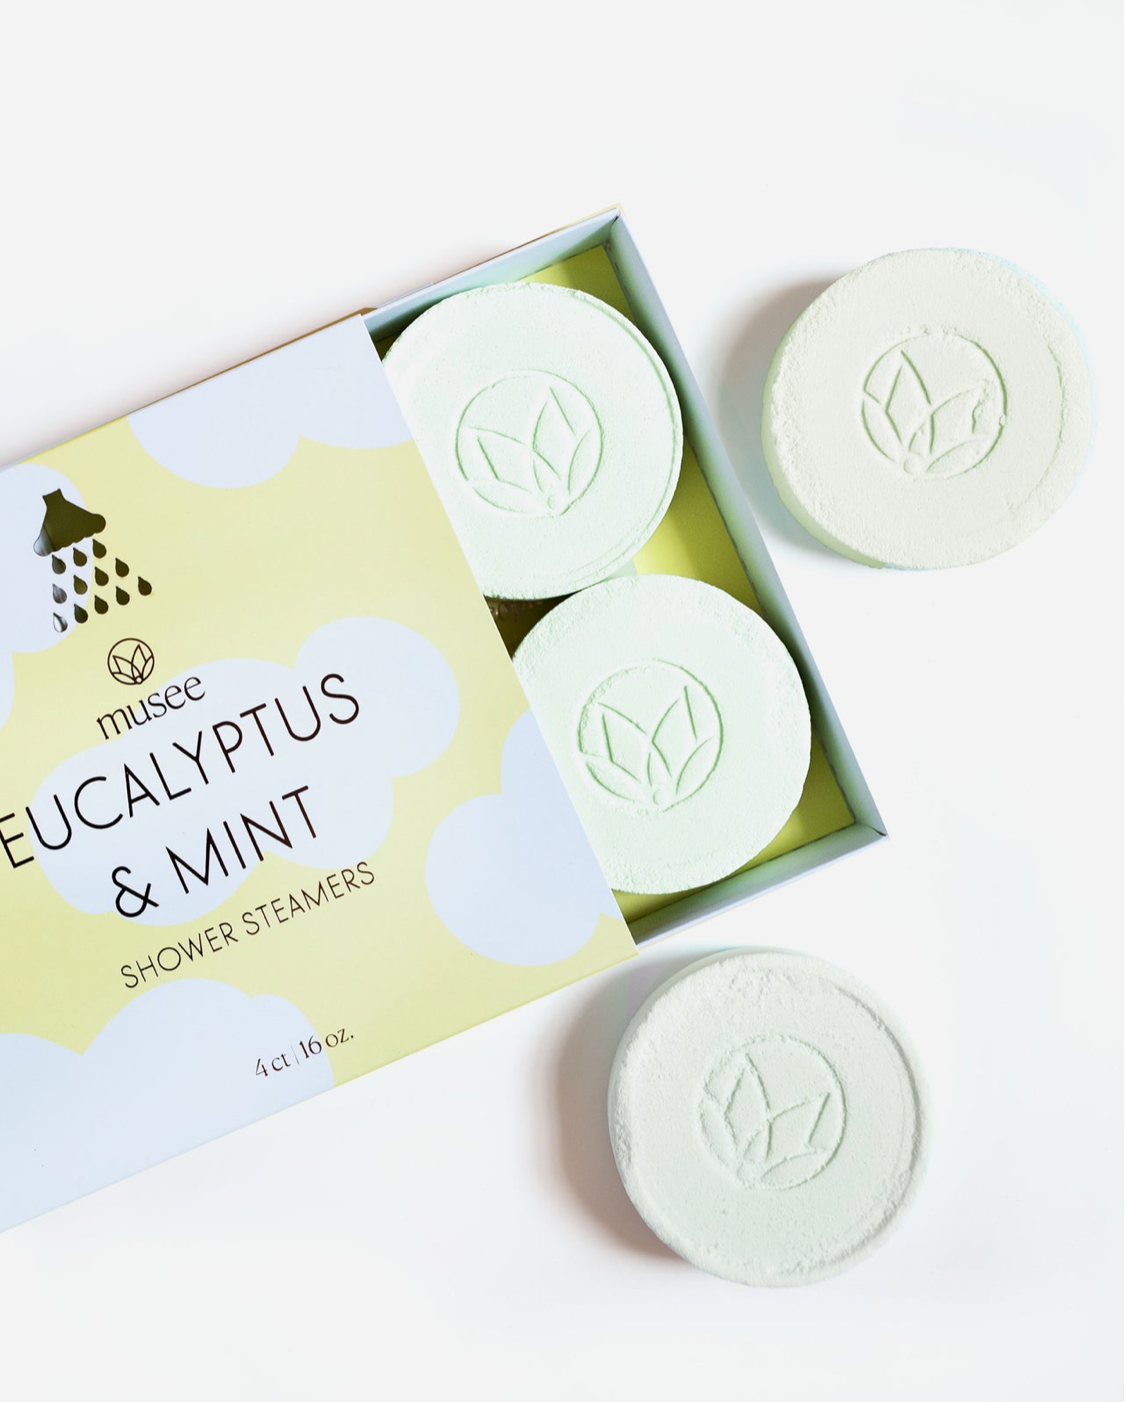 Musee: Eucalyptus & Mint Shower Steamers